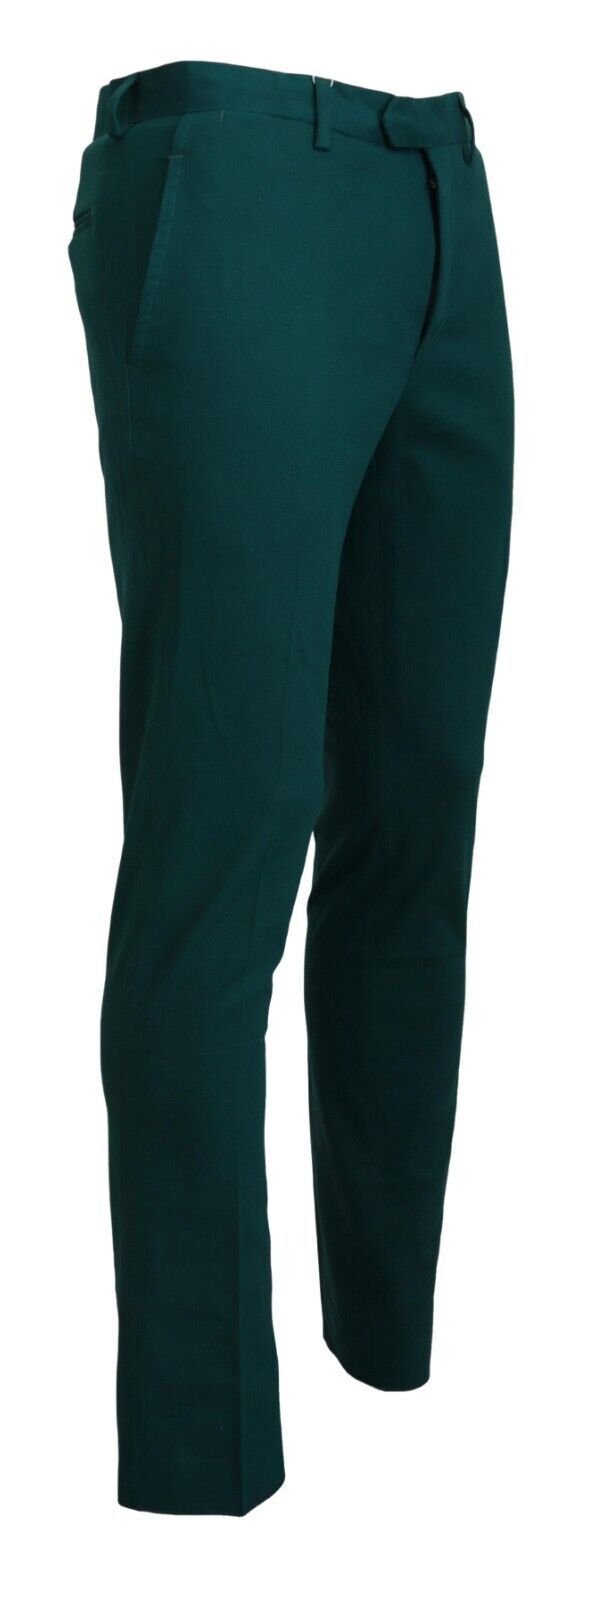 BENCIVENGA Green Straight Fit  Formal Trousers Pants